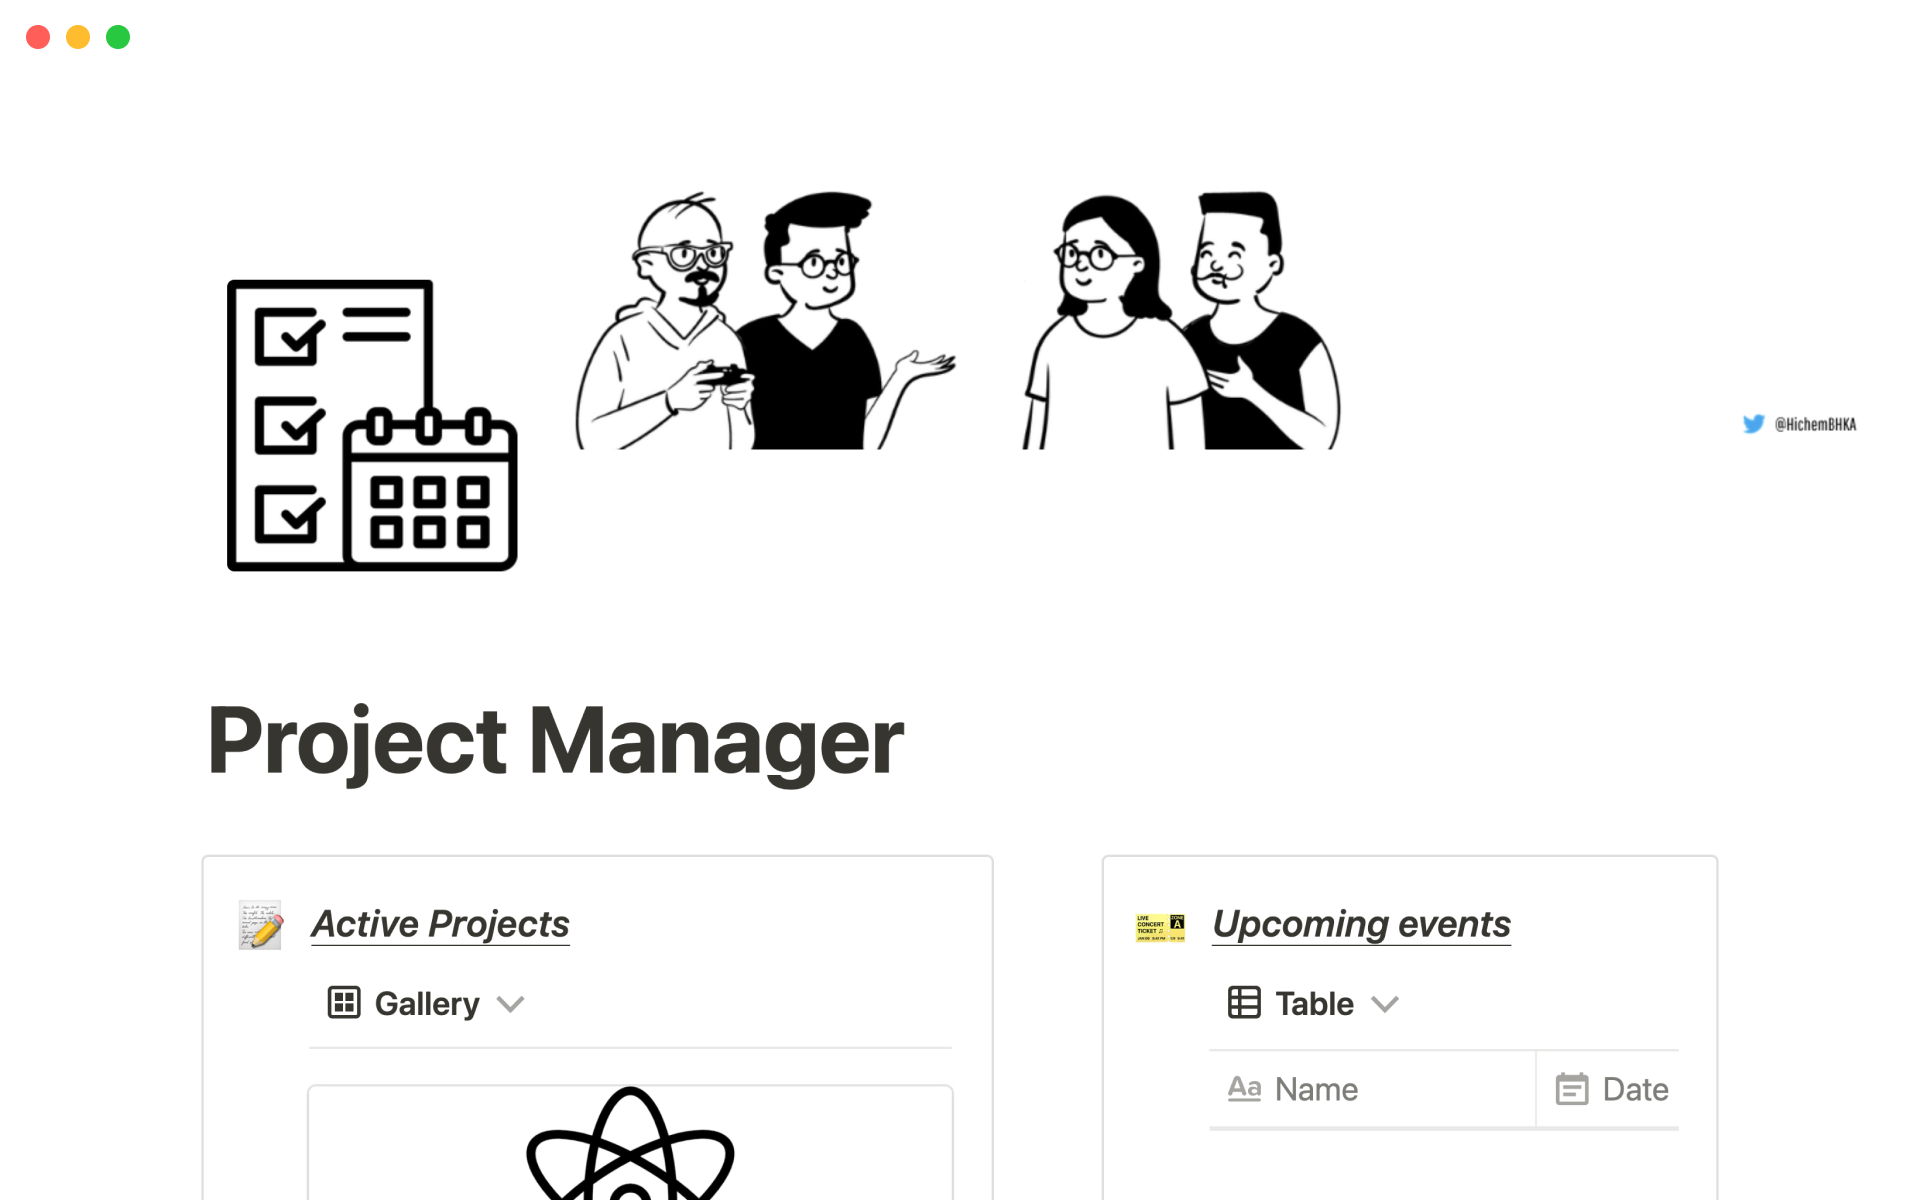 A complete dashboard to manage your projects, tasks, and events.